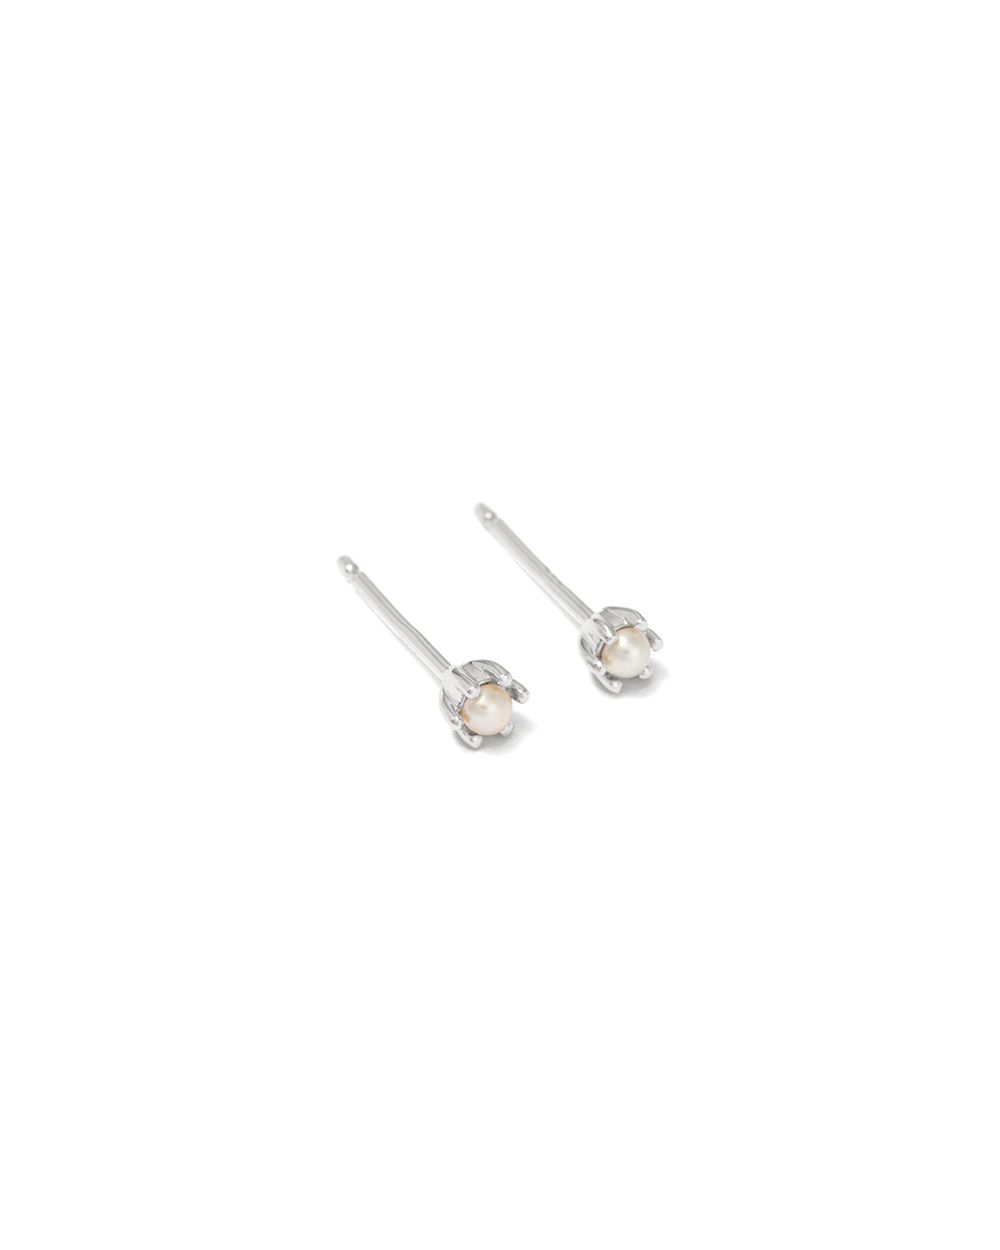 PETITE PEARL STUDS (STERLING SILVER) - IMAGE 4